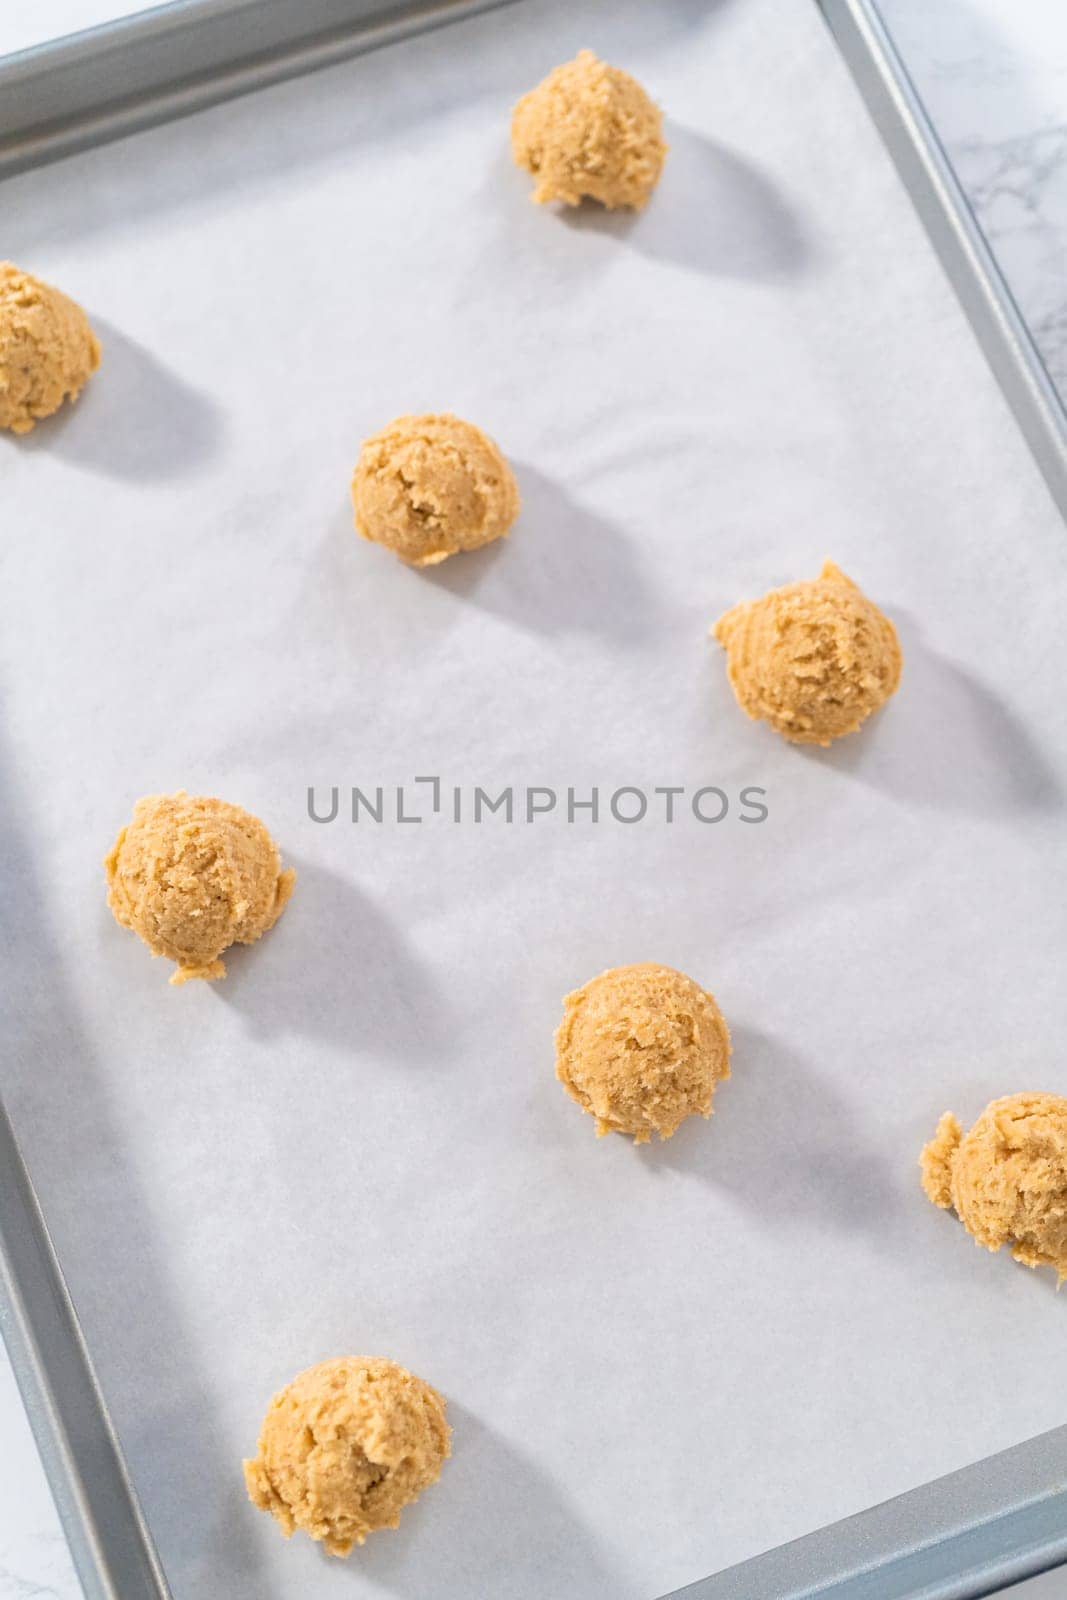 Scooping cookie dough with dough scoop into a baking sheet lined with parchment paper to bake eggnog cookies with a chocolate gingerbread man.